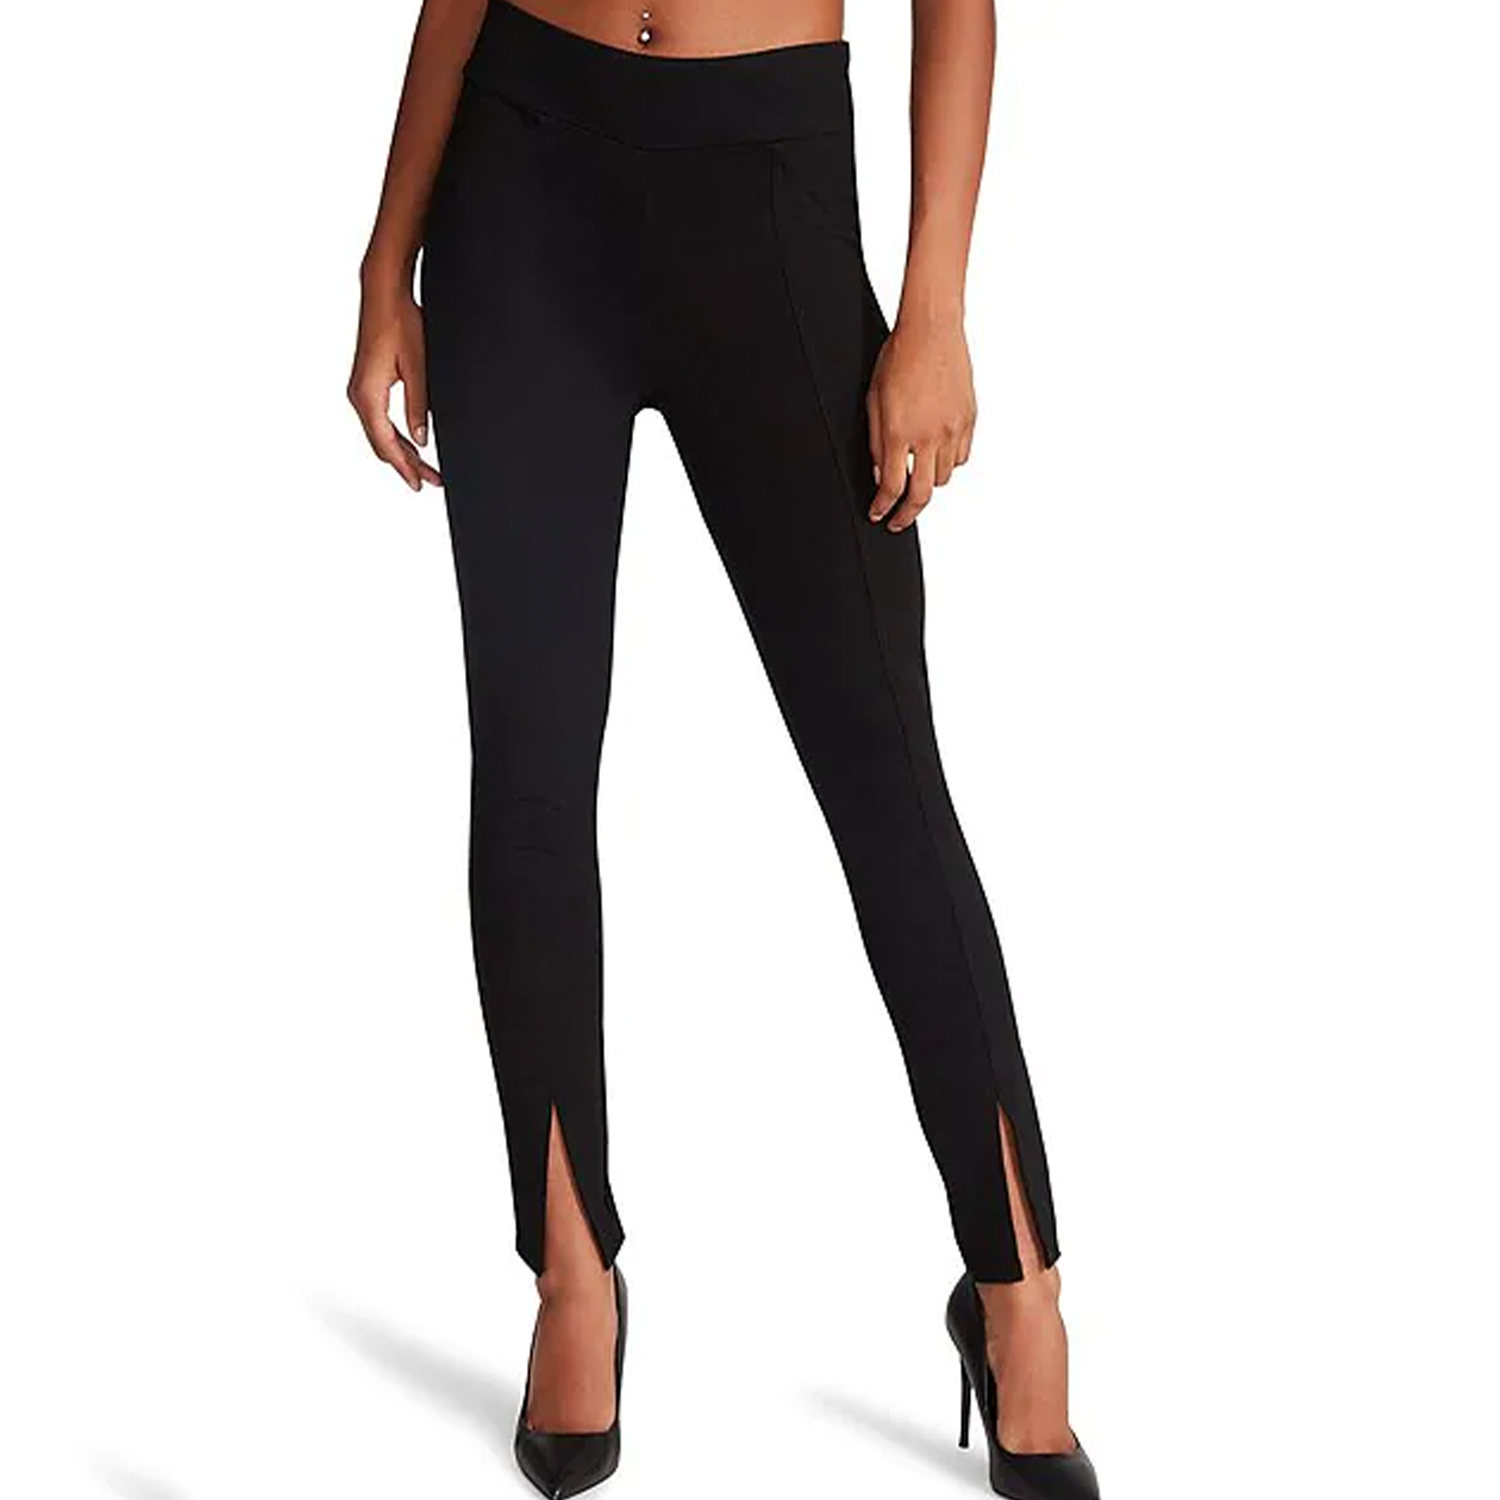 Steve Madden Ludlow Legging. For leggings that look chic and polished, the ludlow legging is a vital addition to your workwear collection These high-waisted leggings come with a slit detail at the hem